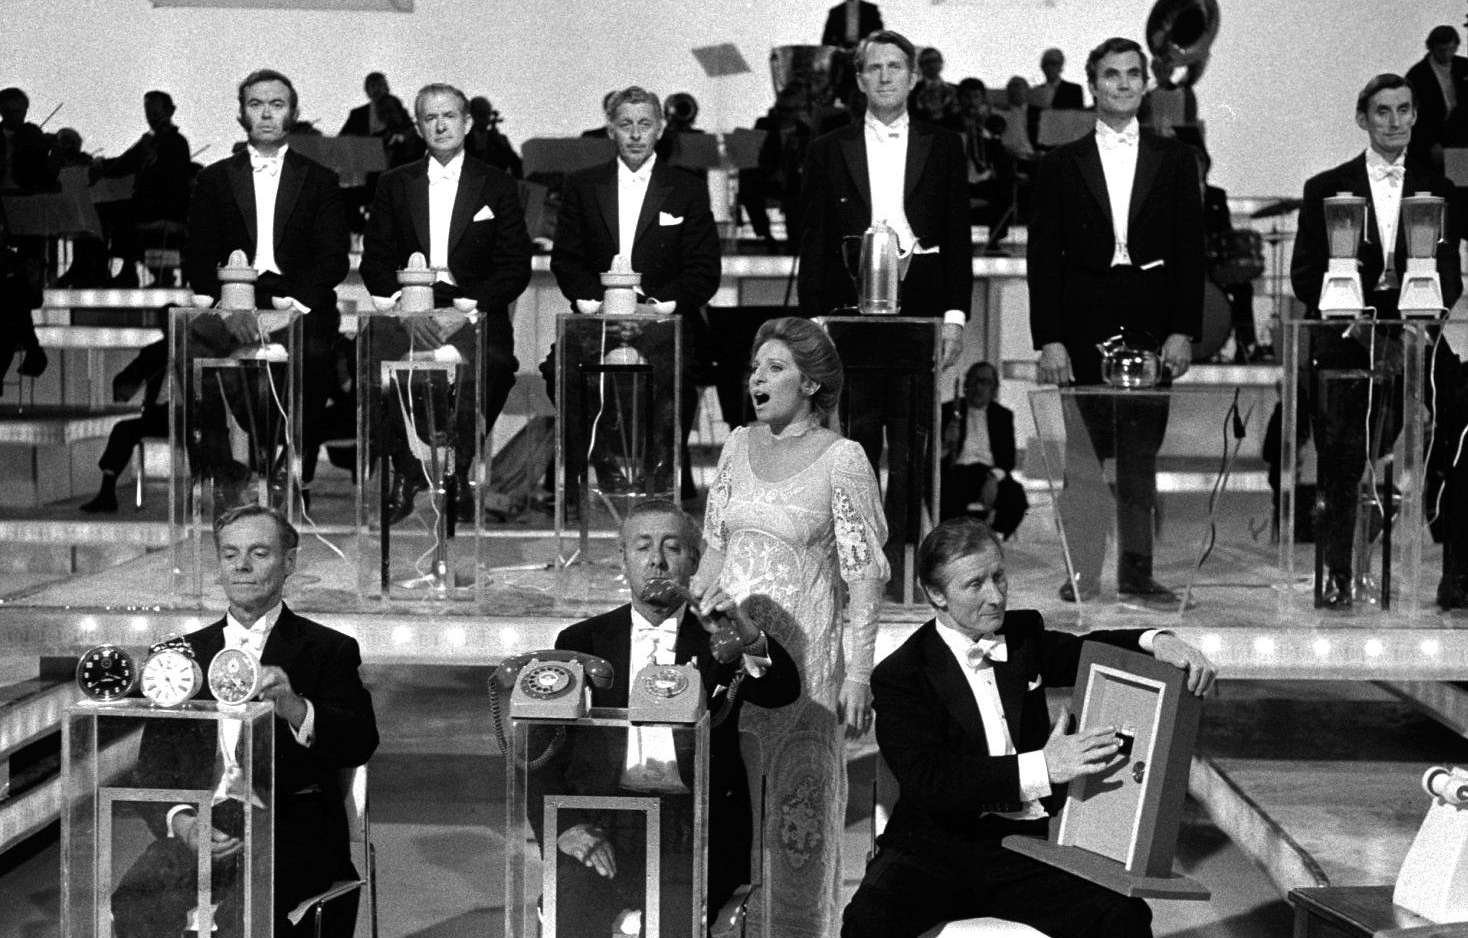 Streisand with a variety of musicians.